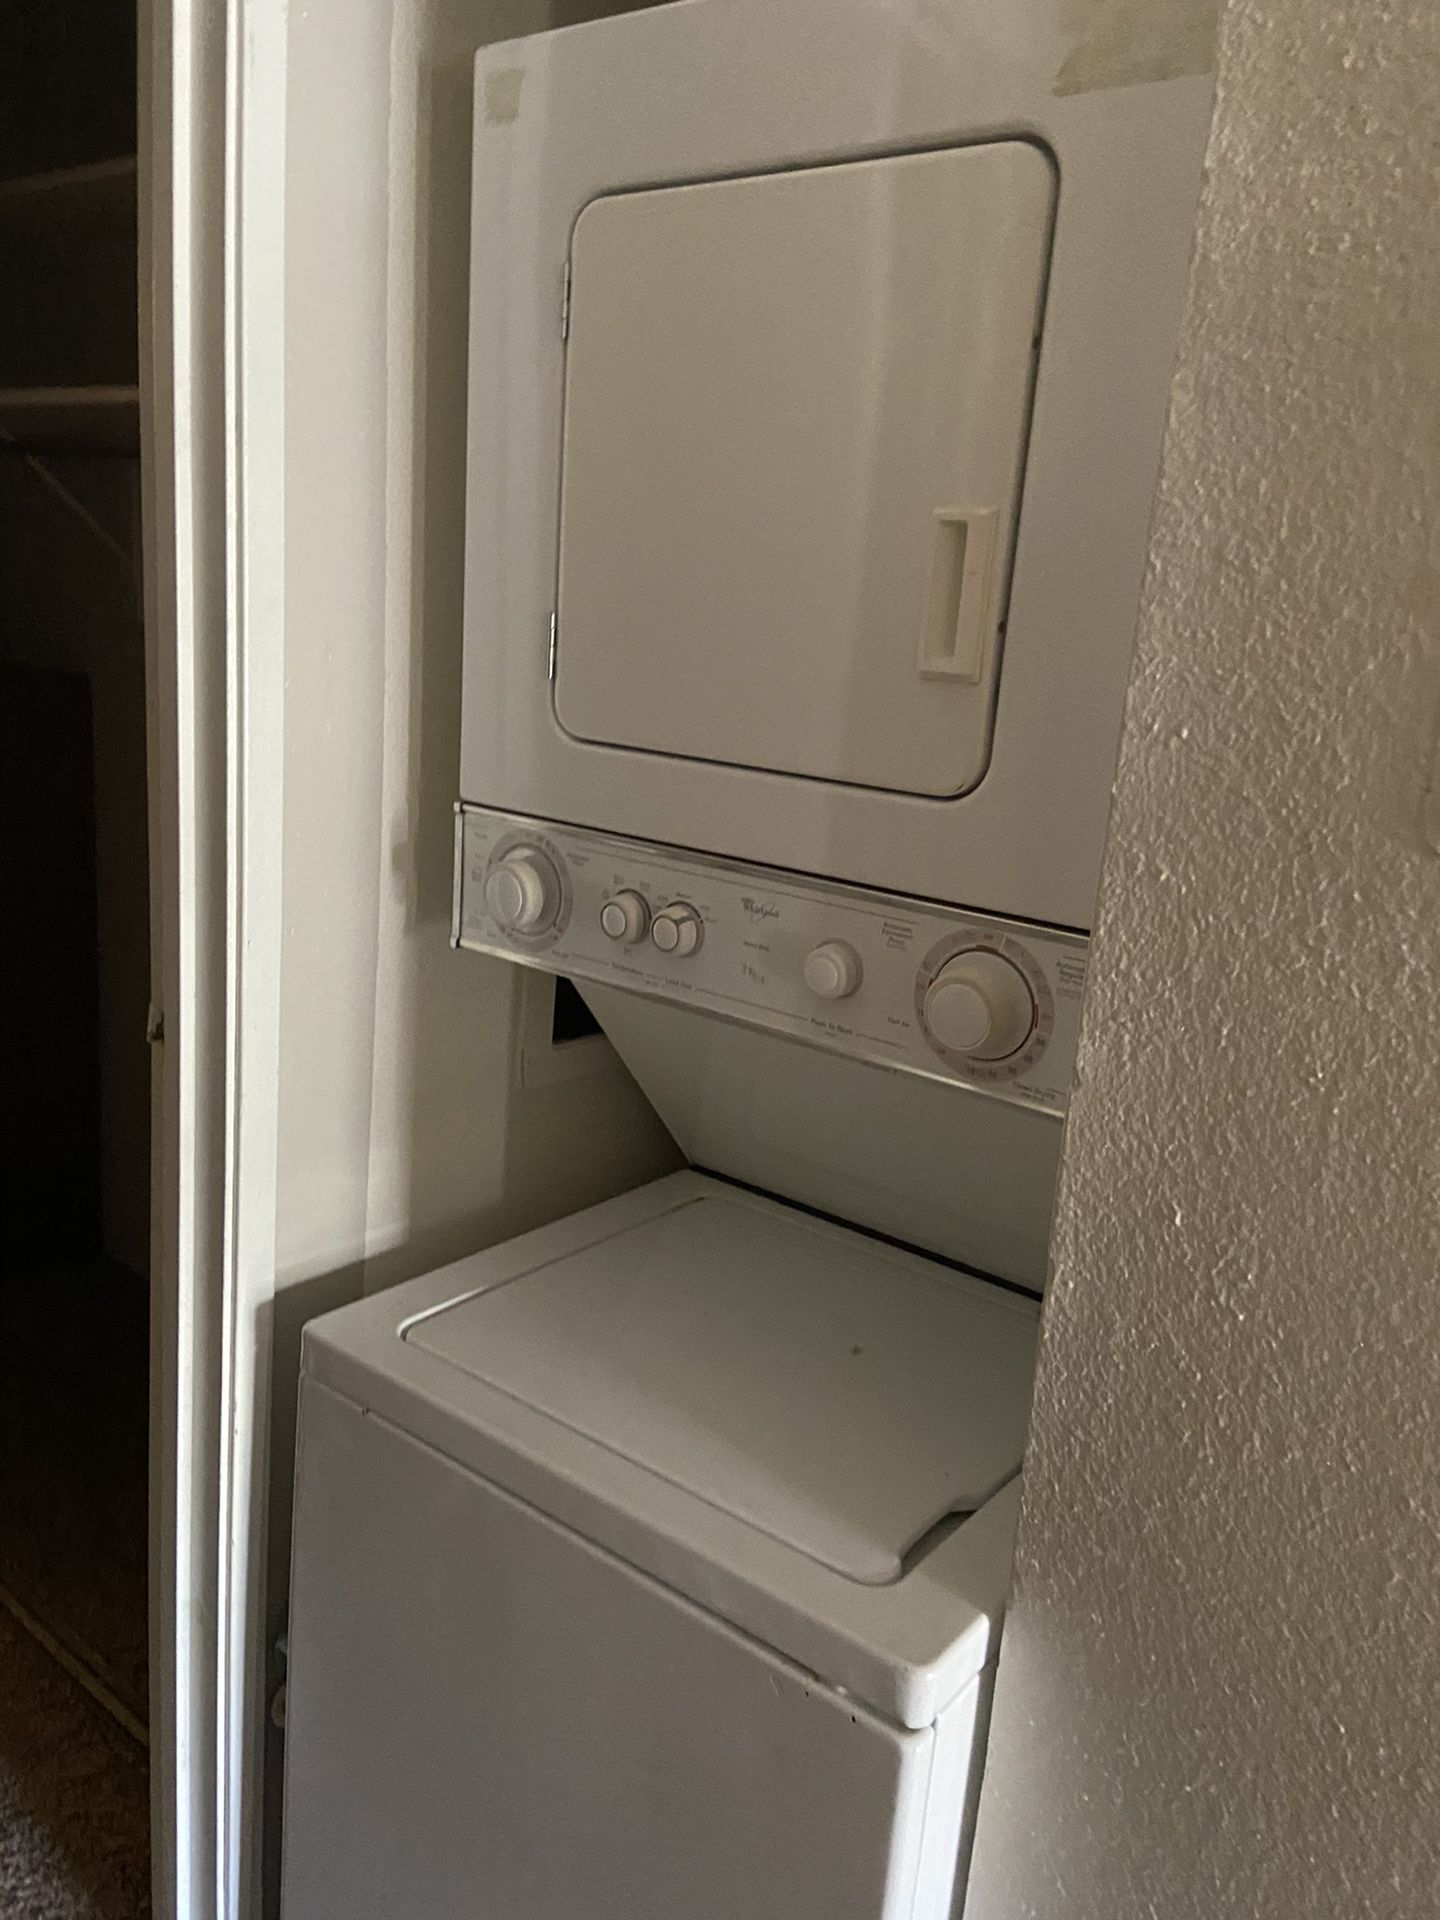 24” stackable washer dryer